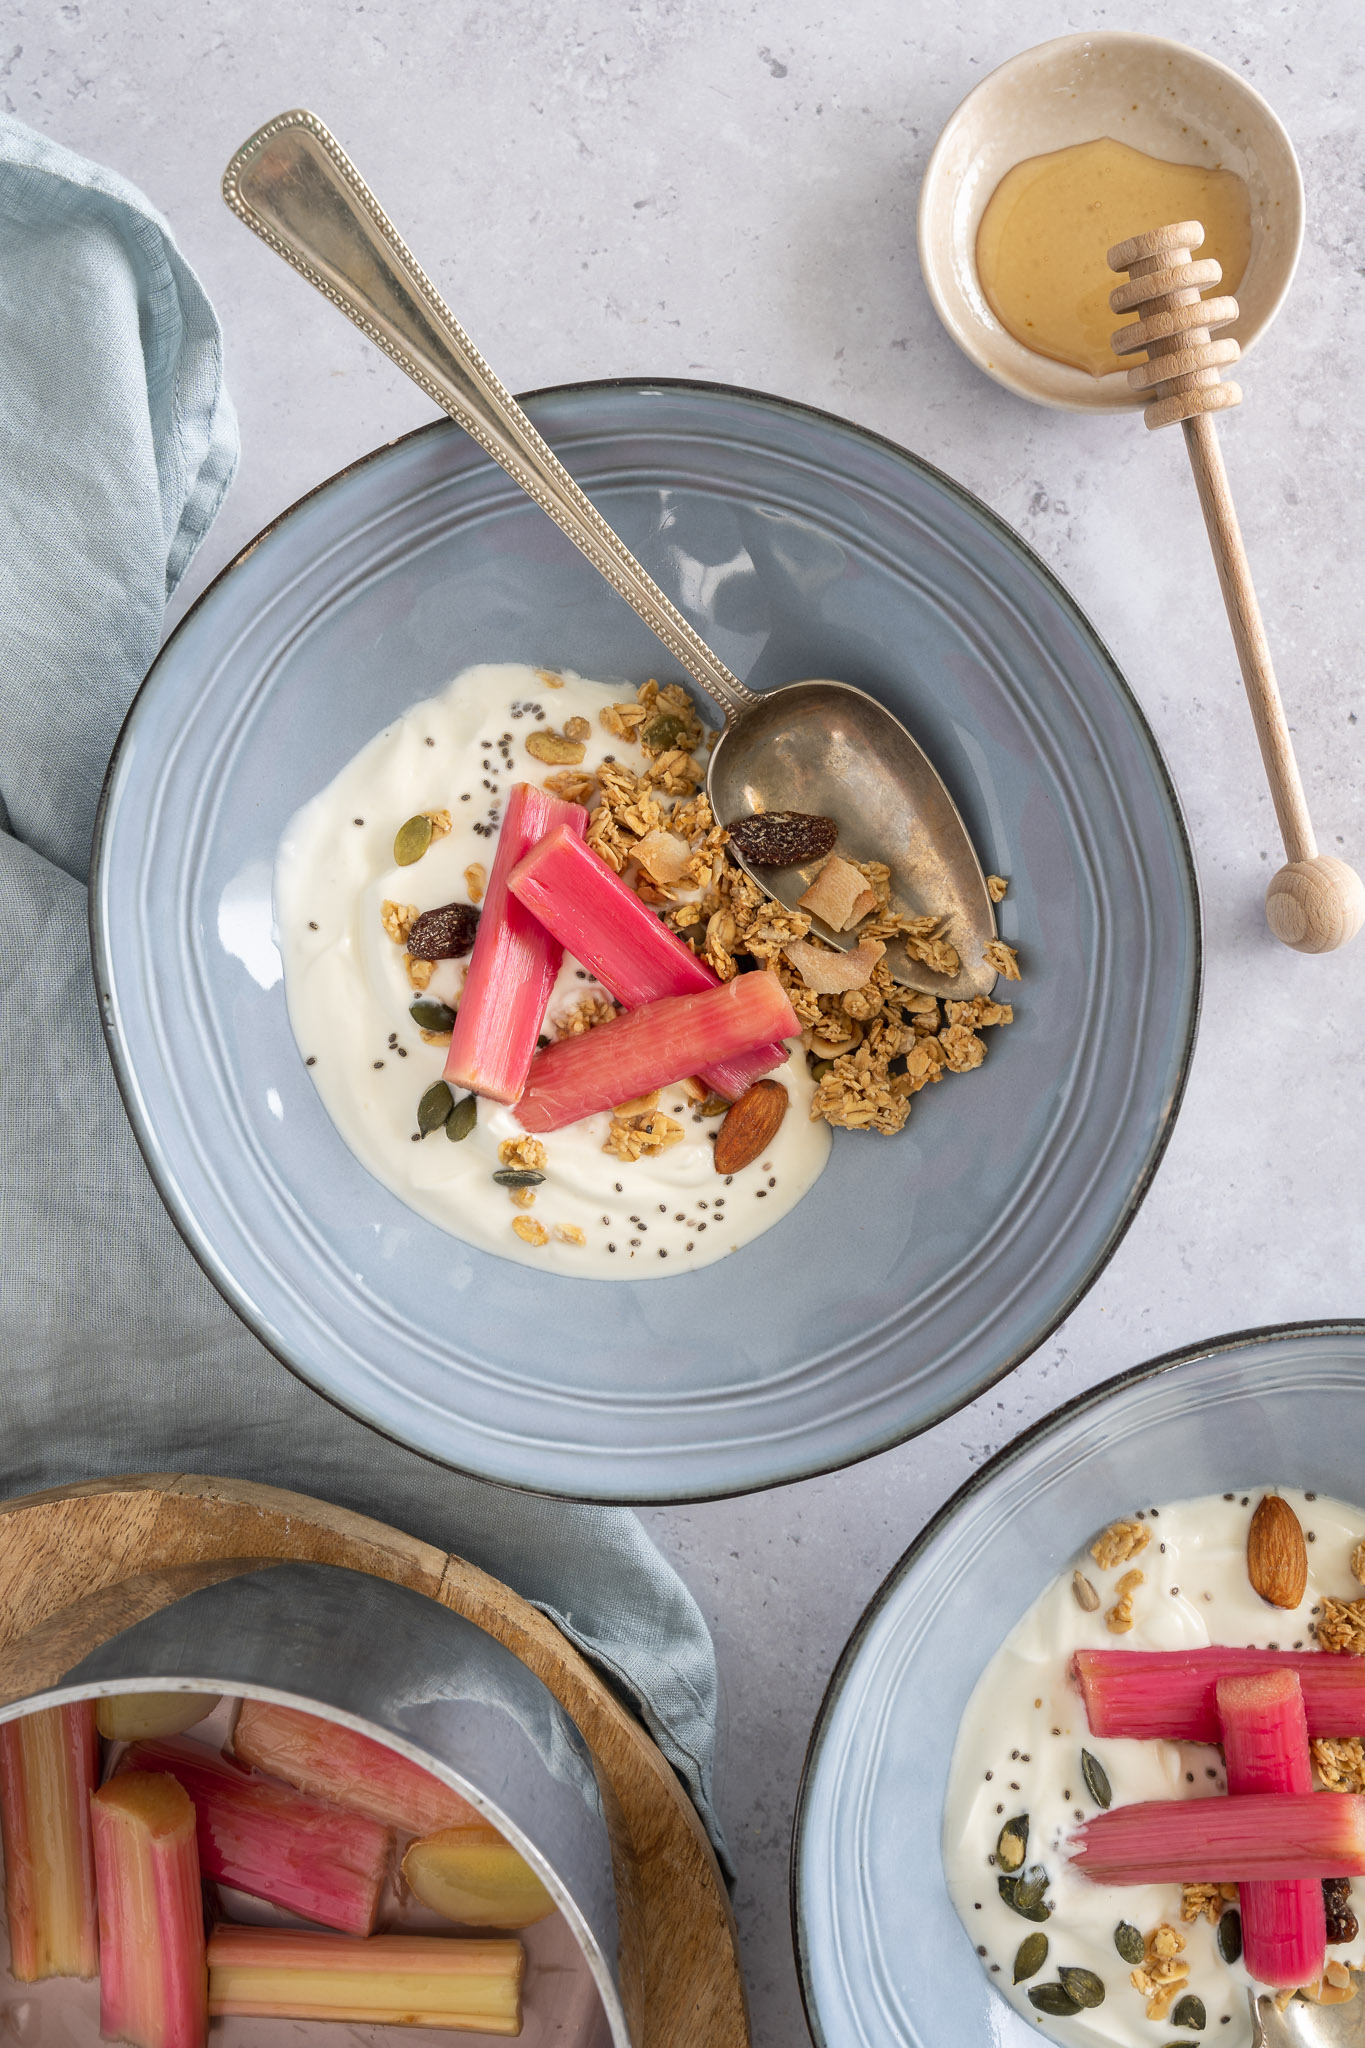 Greek yoghurt with poached rhubarb with ginger